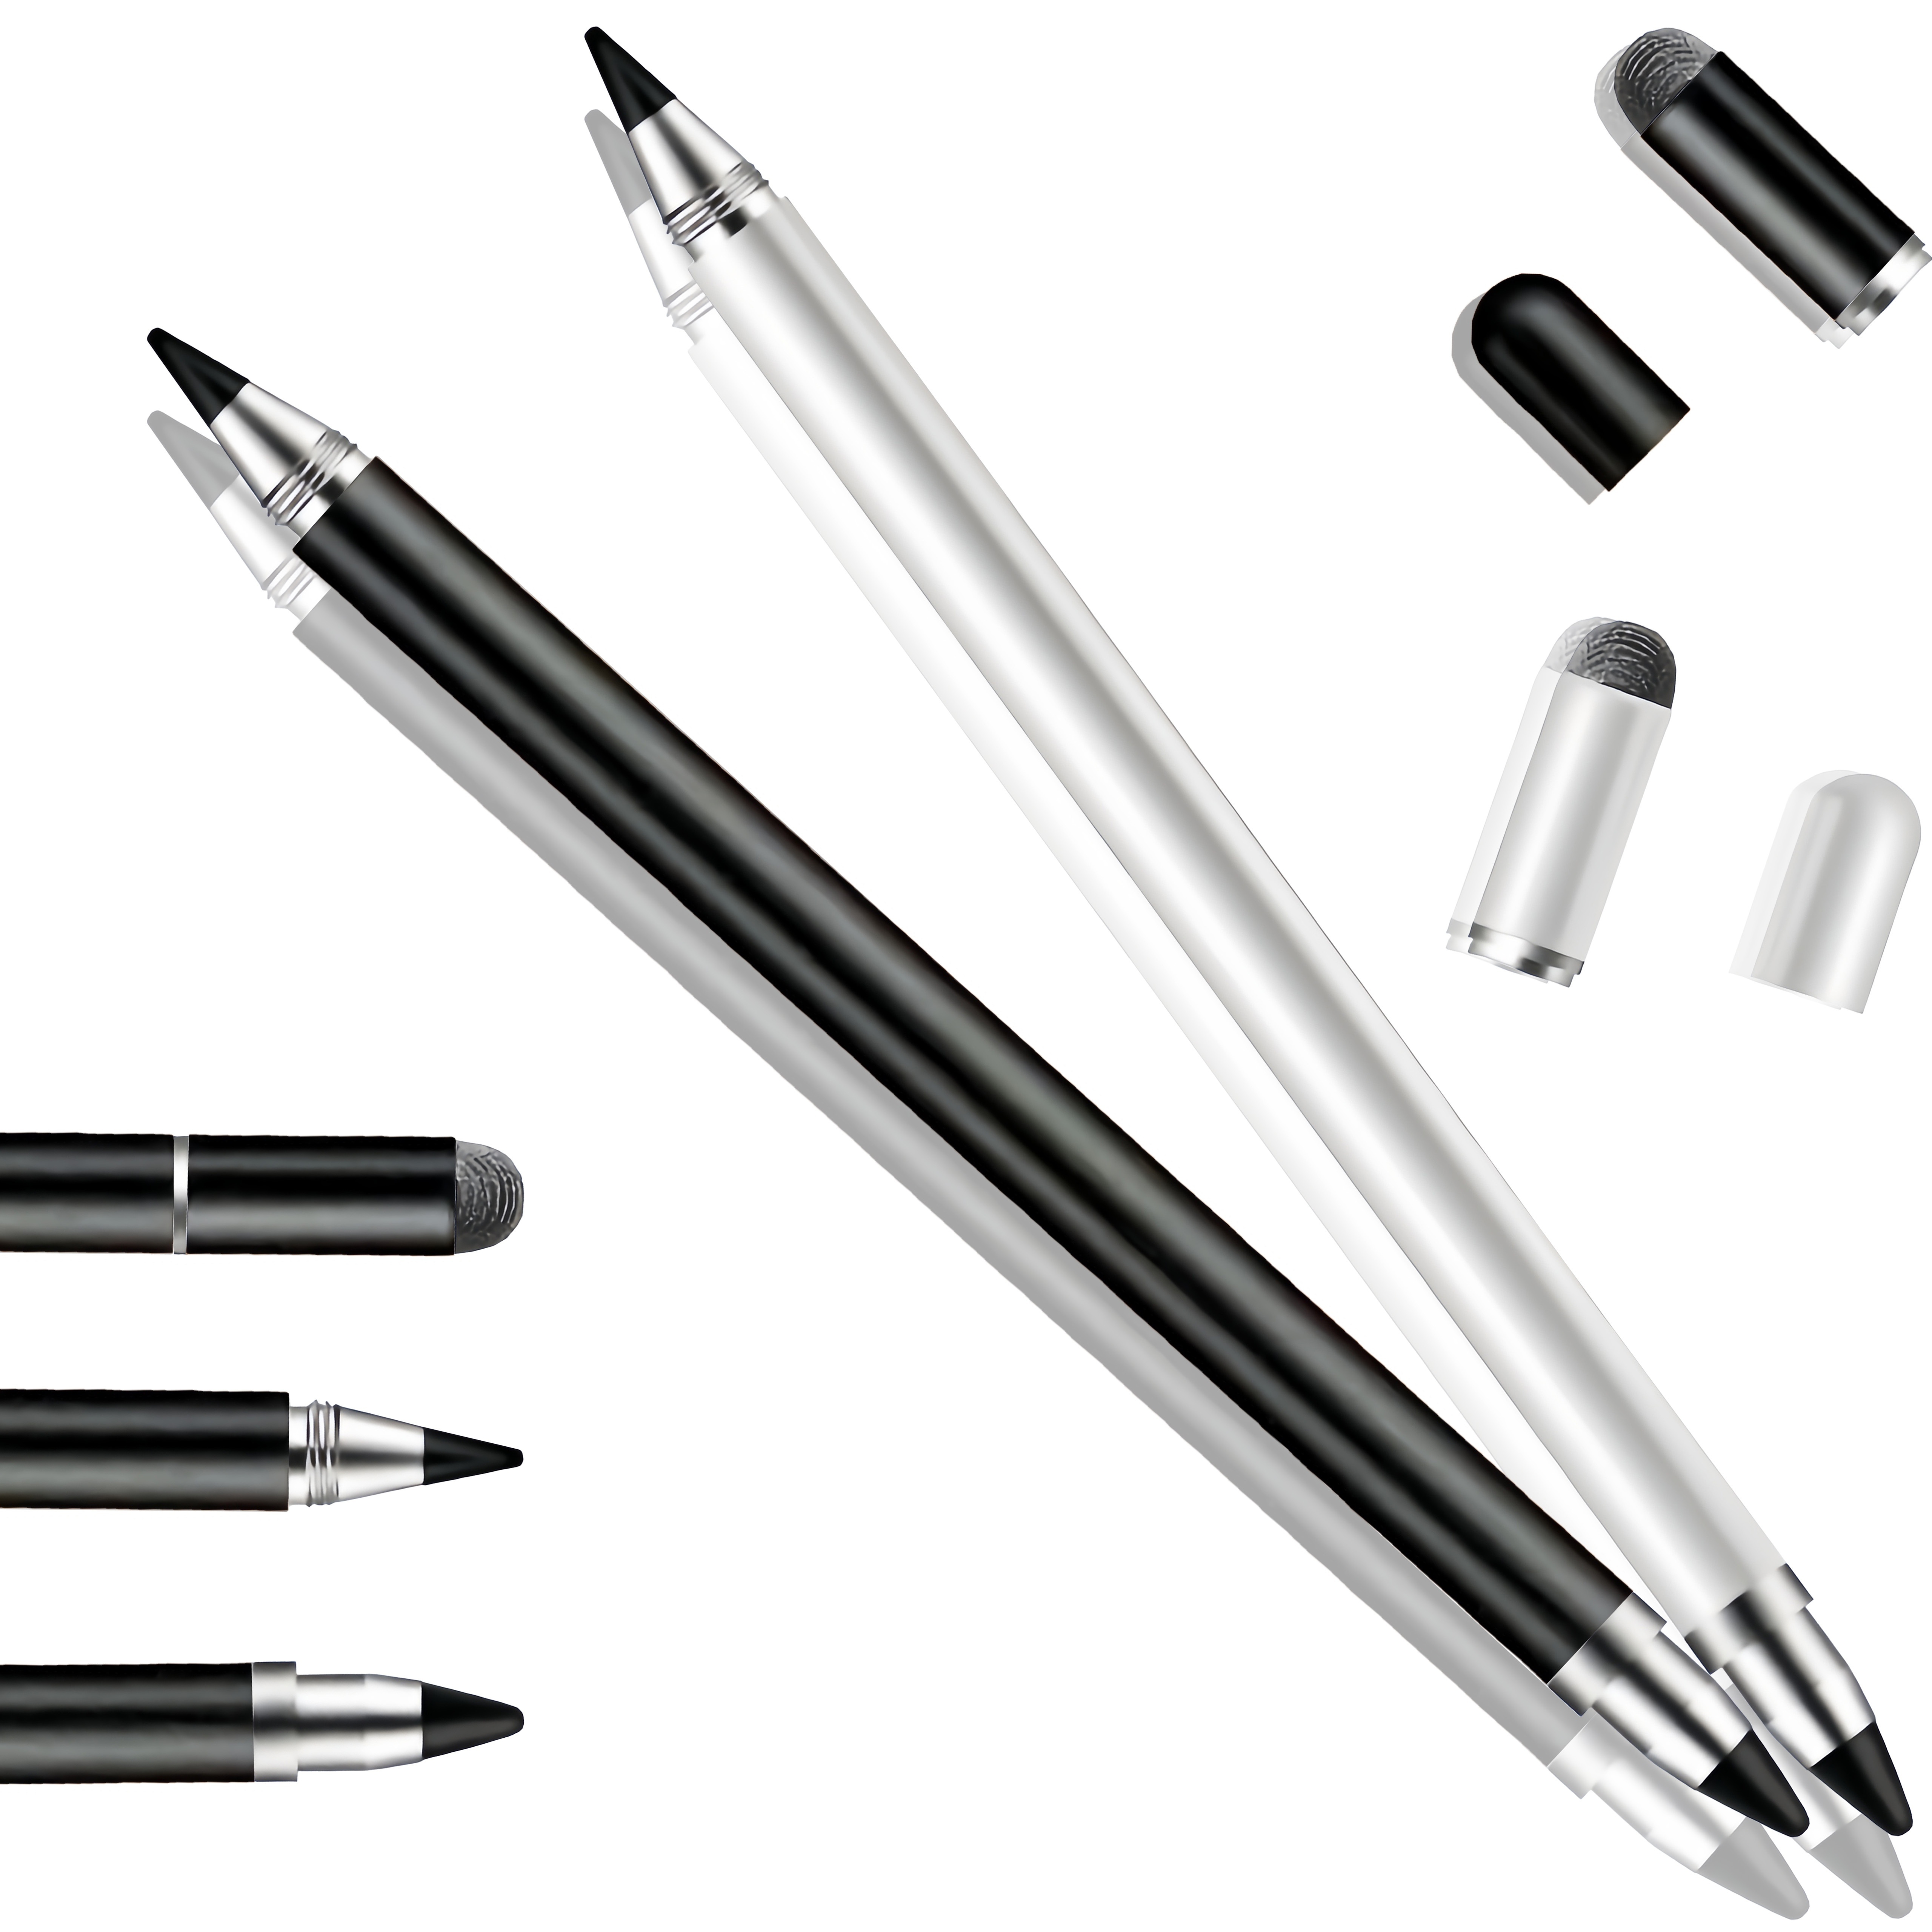 

3 In 1 Stylus Pens For Touch Screens, High Precision And Sensitivity Universal Capacitive Stylus, Including 2 Replacement Tips - Ideal For Tablets, Laptops, For Iphone, And For Ipad